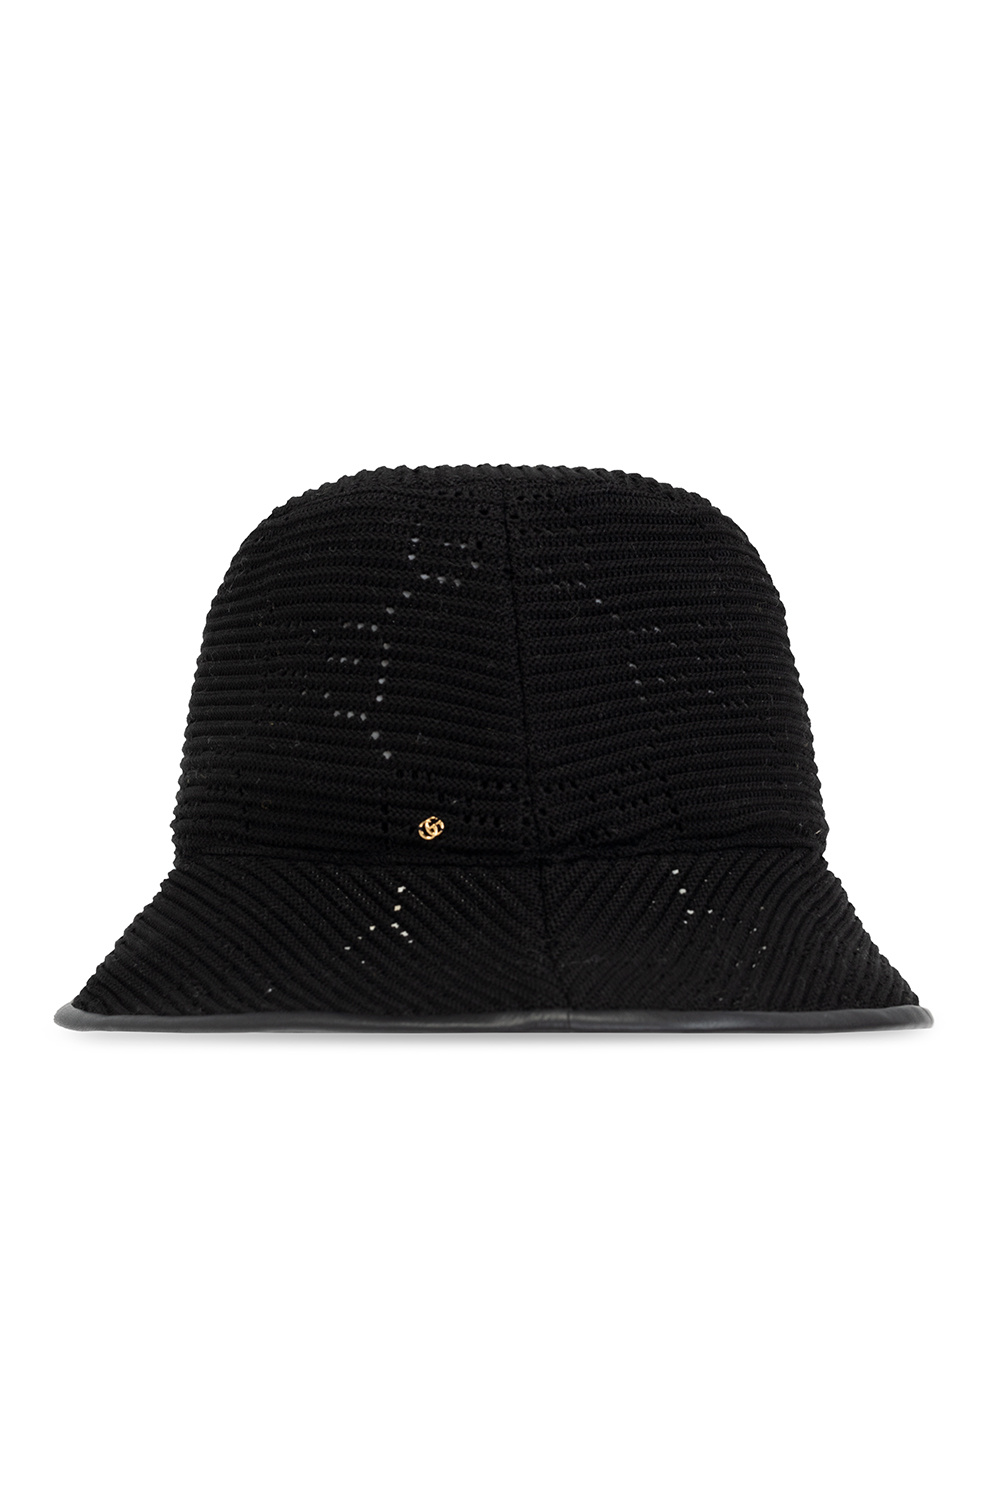 Gucci woven hat oseree hat gold